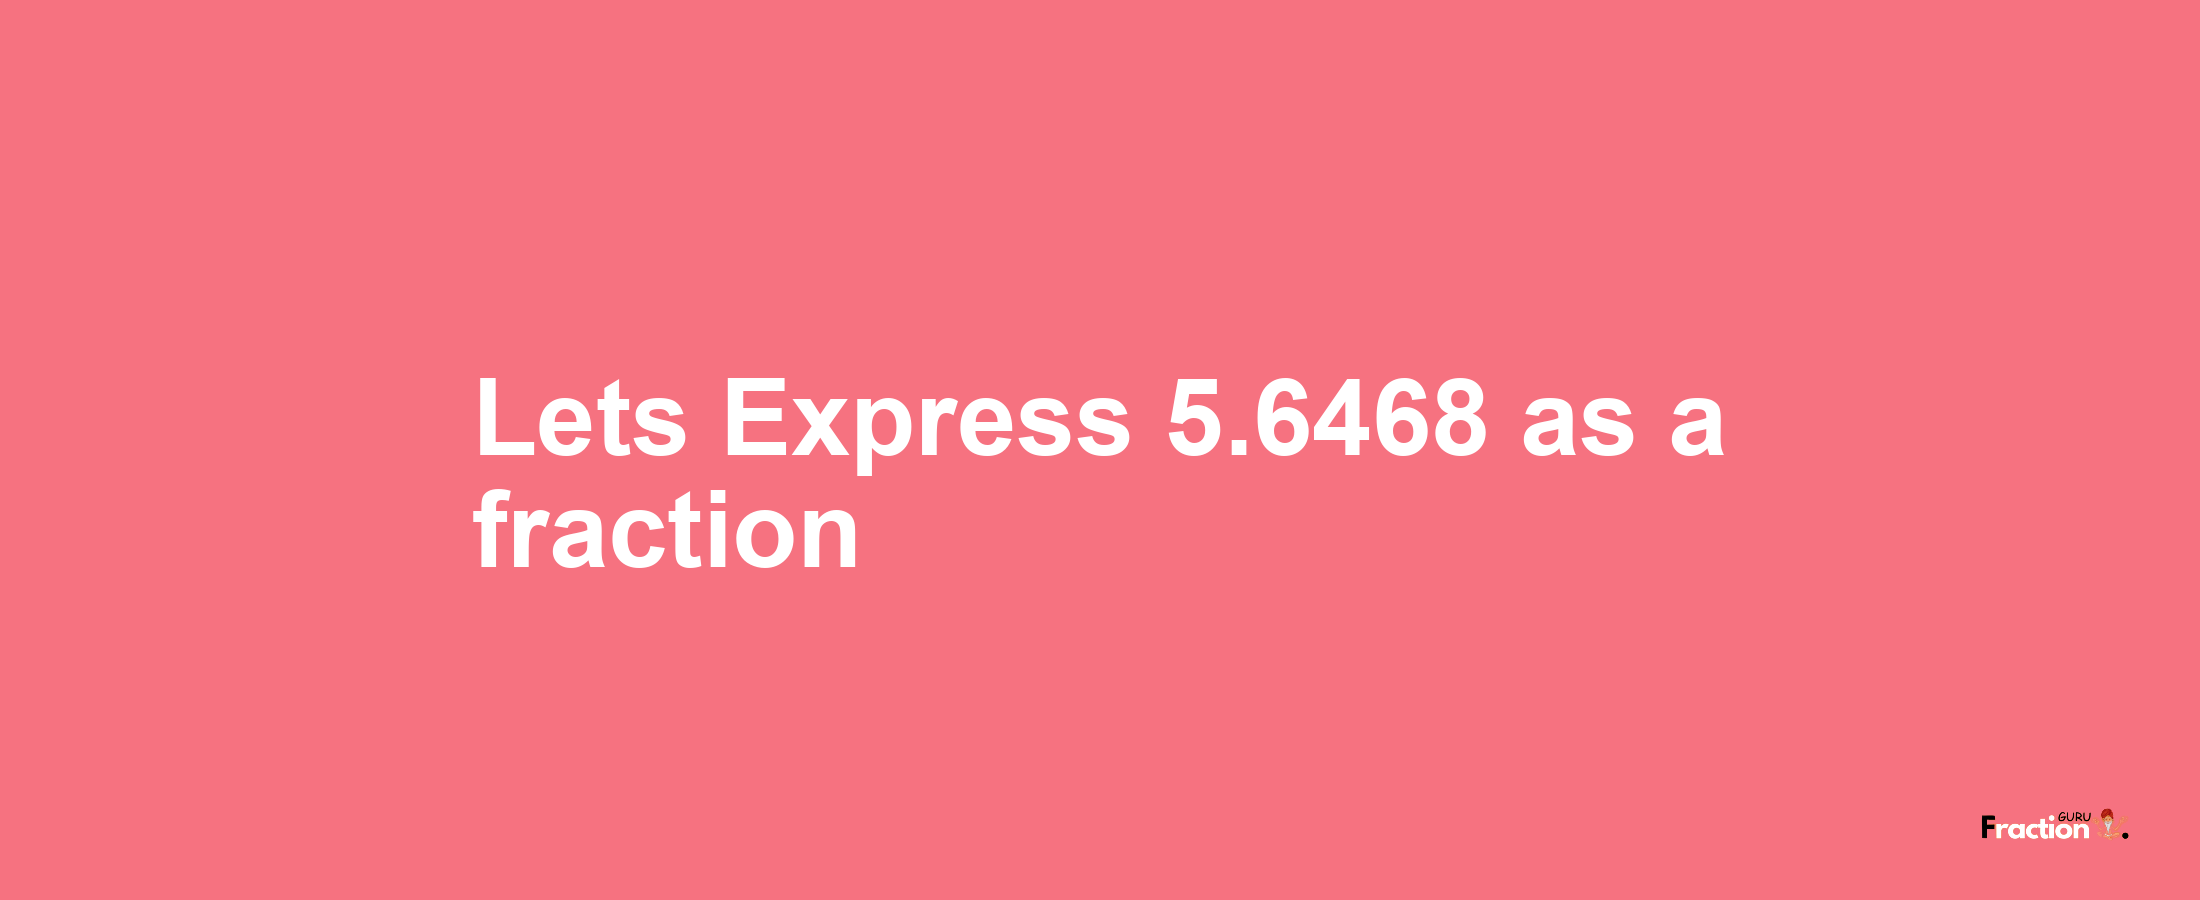 Lets Express 5.6468 as afraction